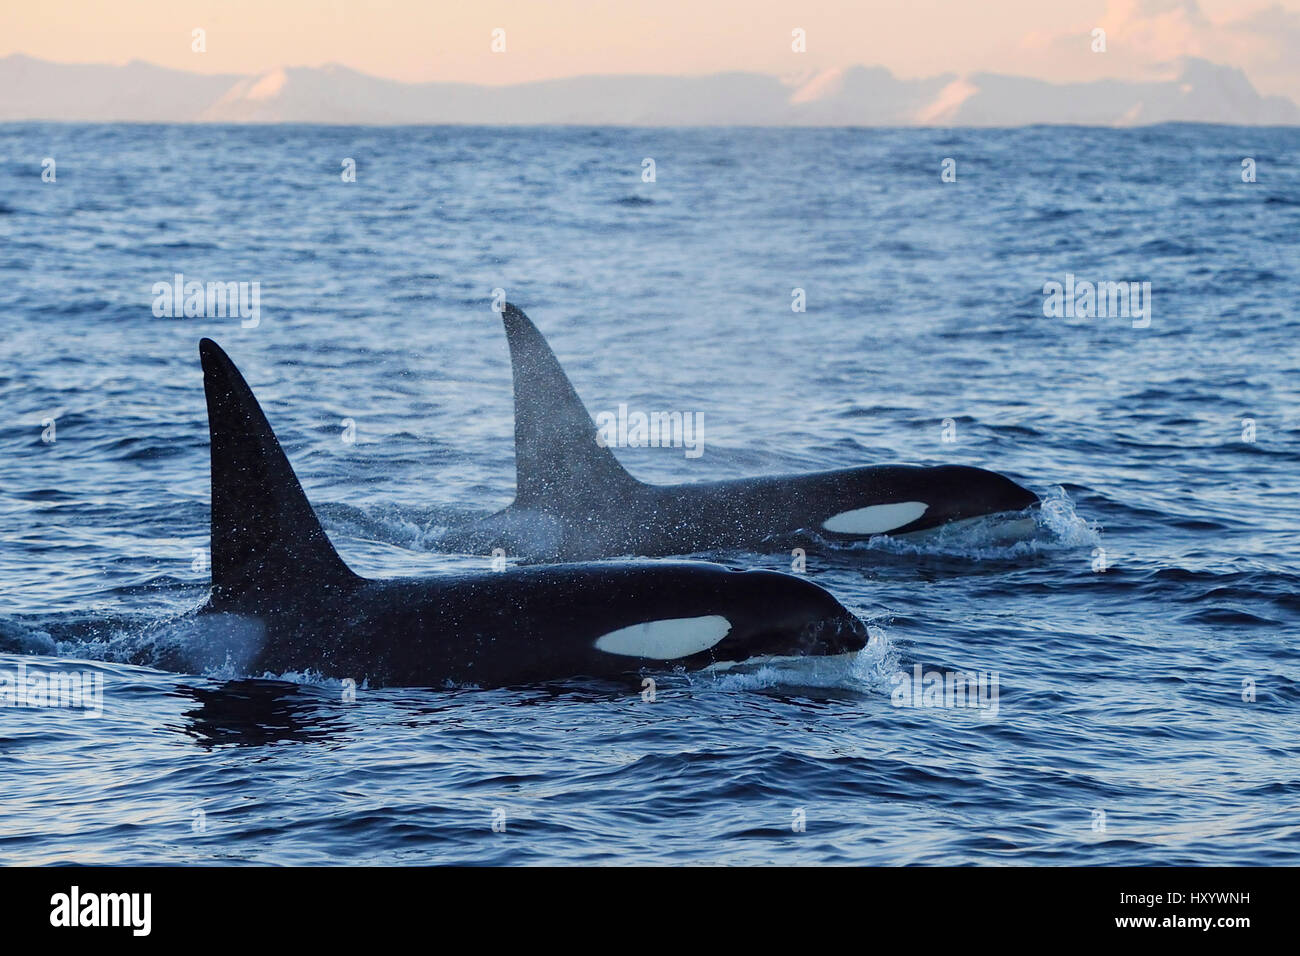 Two Orcas / Killer whales (Orcinus orca) surfacing, Senja, Troms County, Norway, Scandinavia, January. Cetaceans are attracted to this area to feed on large numbers of spawning Herring fish. Stock Photo